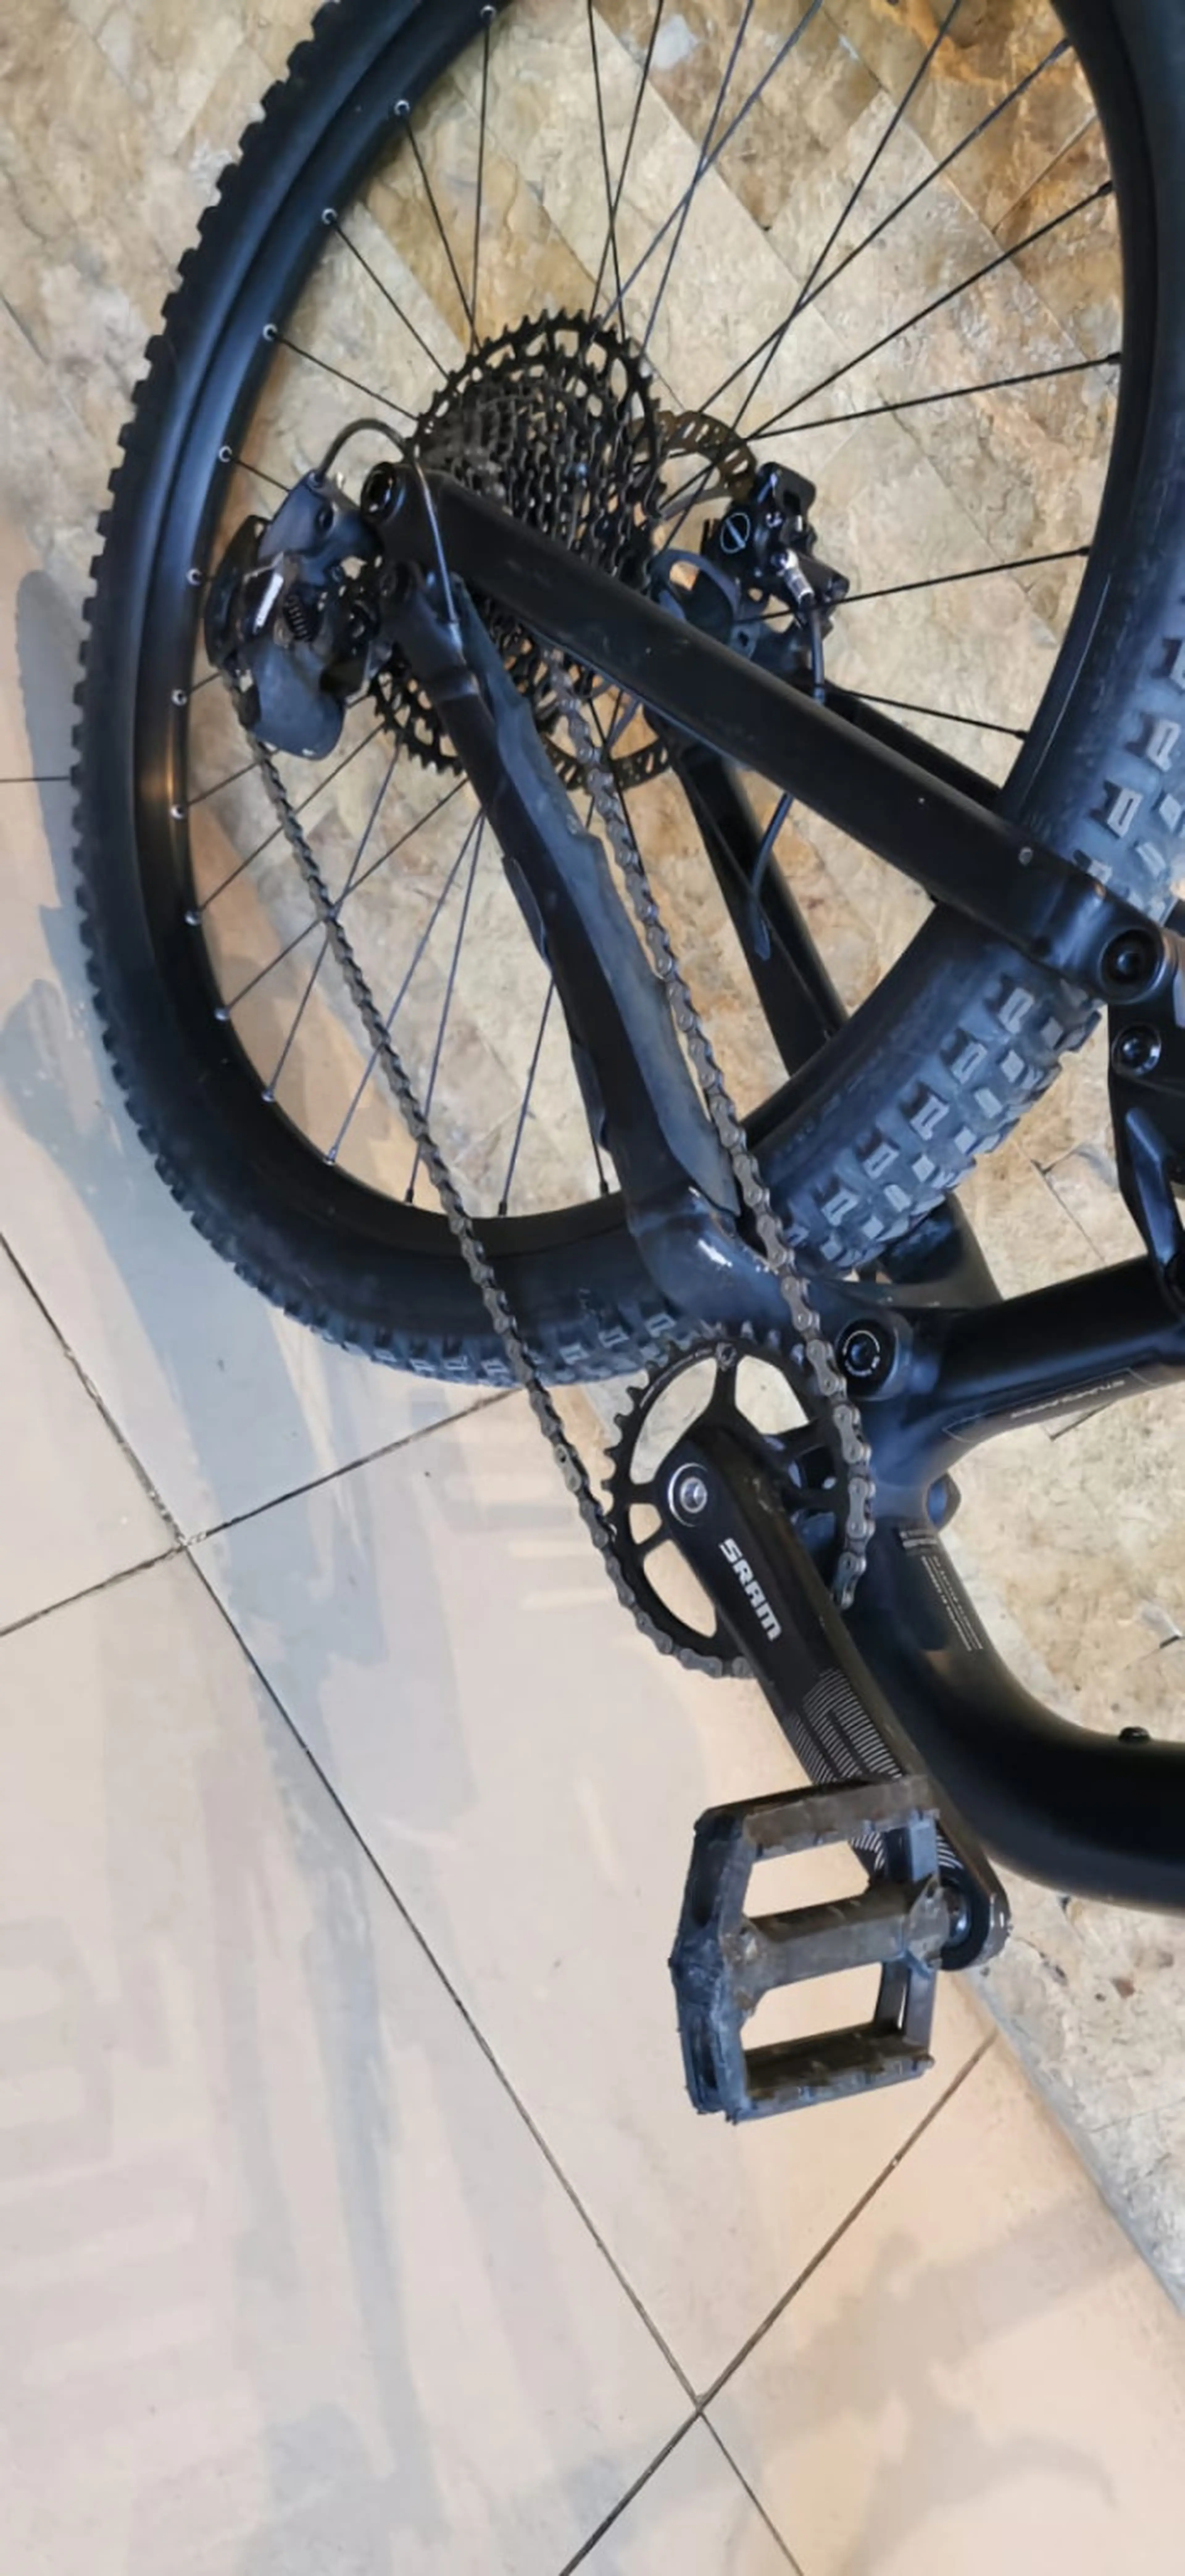 3. Specialized stumpjumper alloy